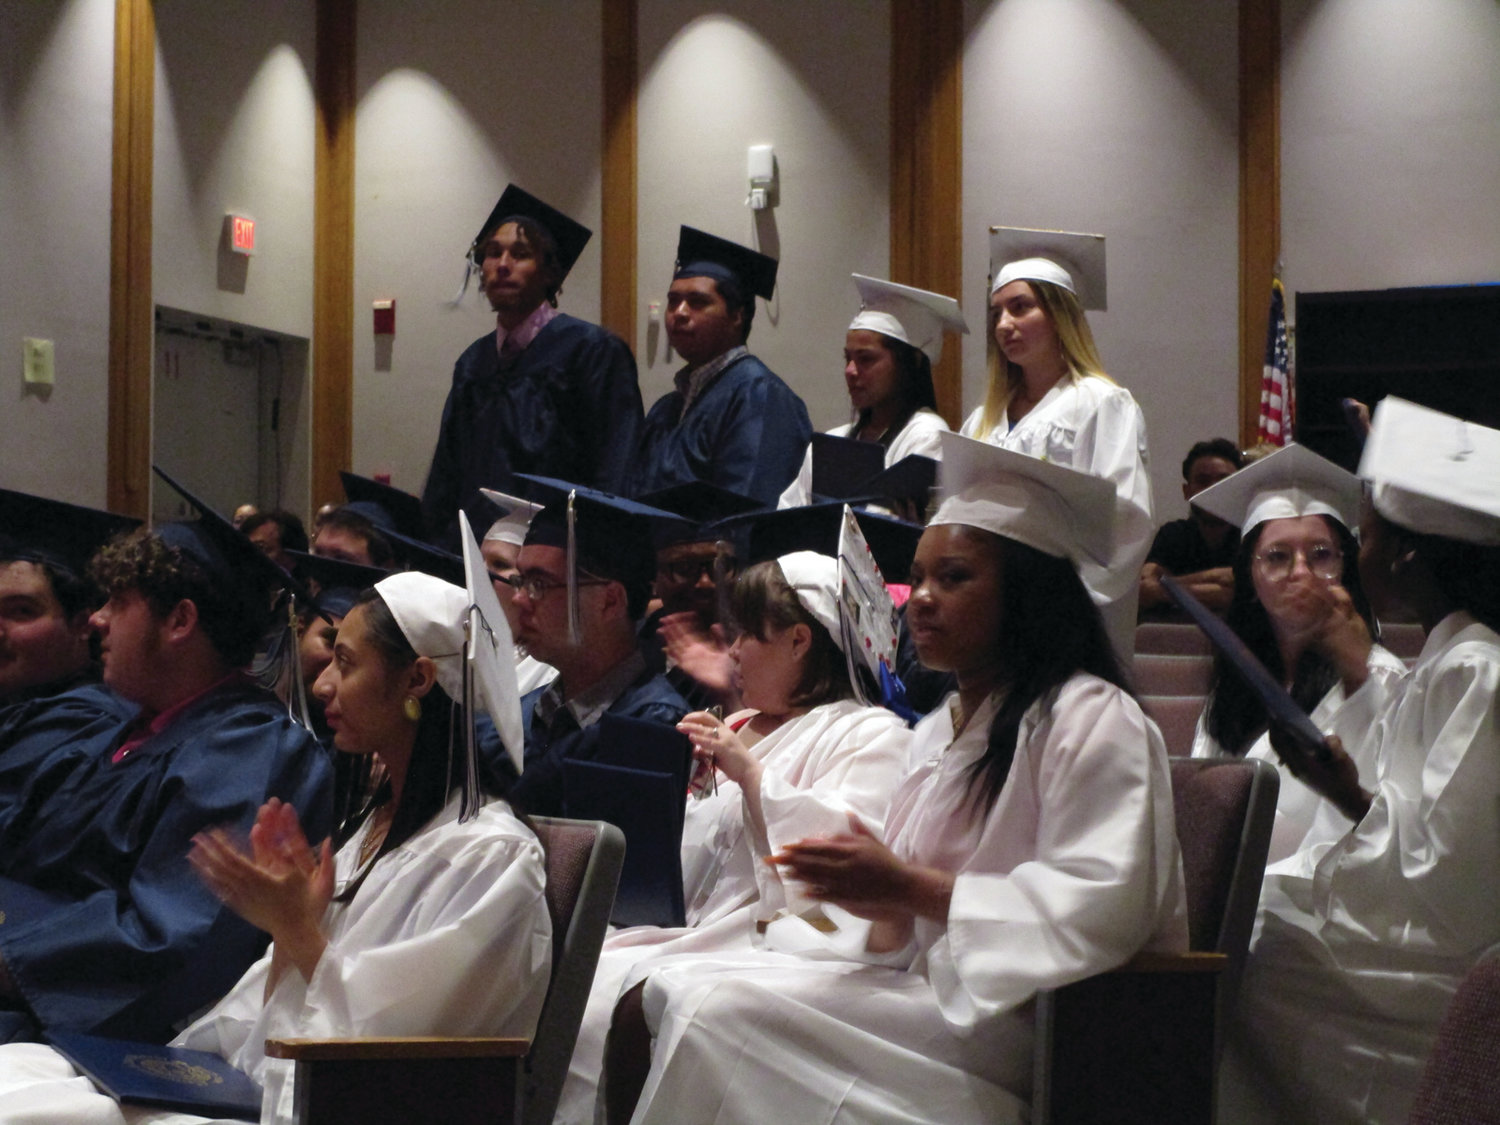 REASON TO CHEER: NEL/CPS Construction & Career Academy graduates cheer on their fellow classmates during the ceremony.